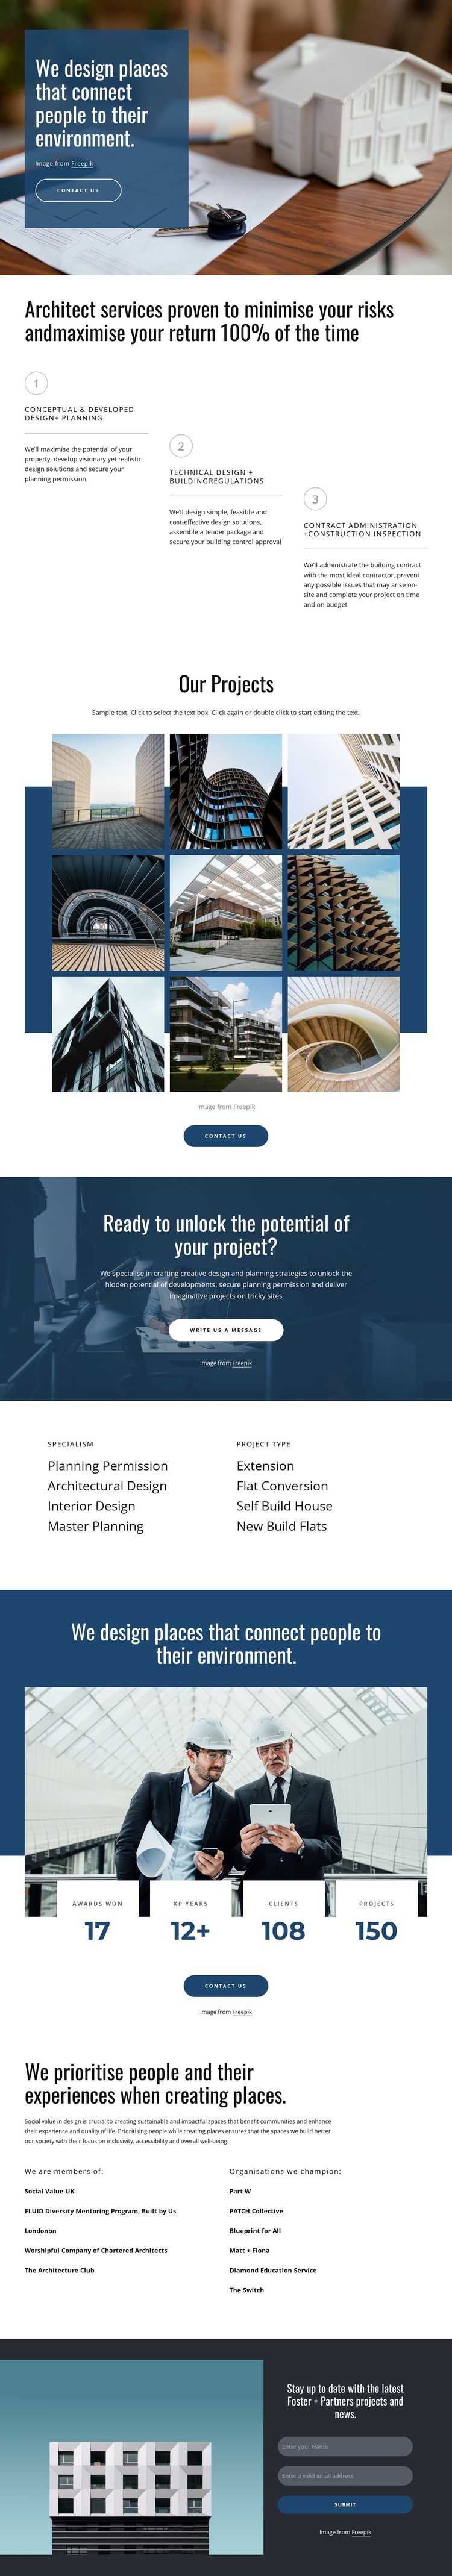 We design amazing projects Template